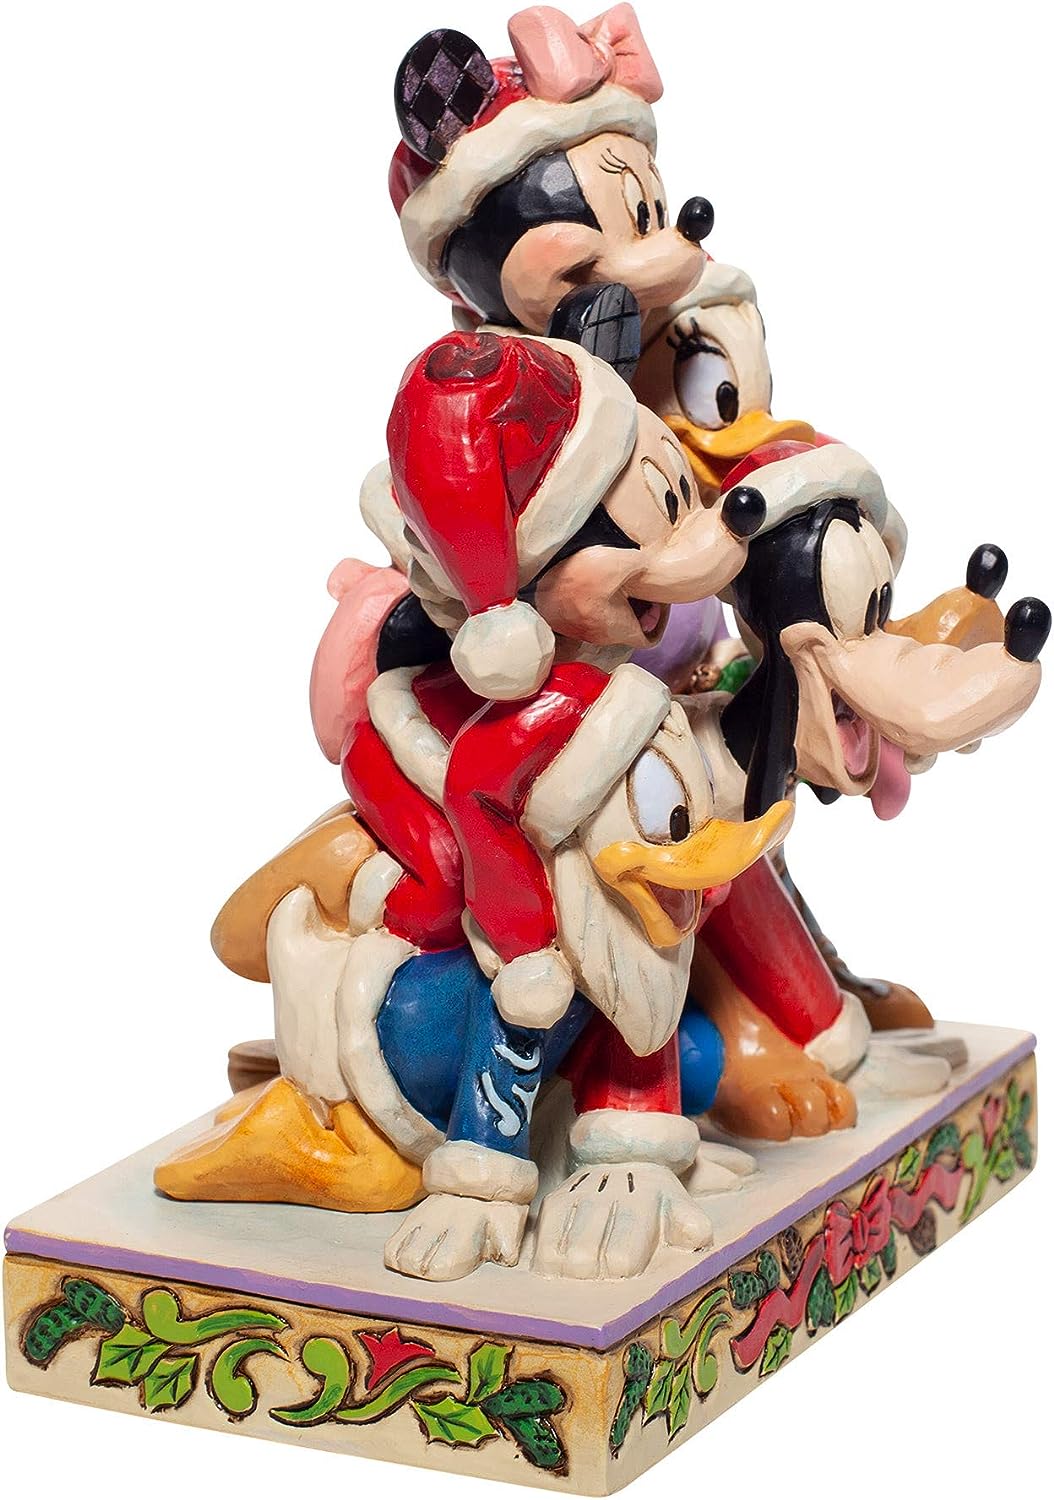 Piled-High-Holiday-Cheer-Mickey-Goofy-Donald-Minnie-Pluto-berlindeluxe-hunde-maeuse-seite